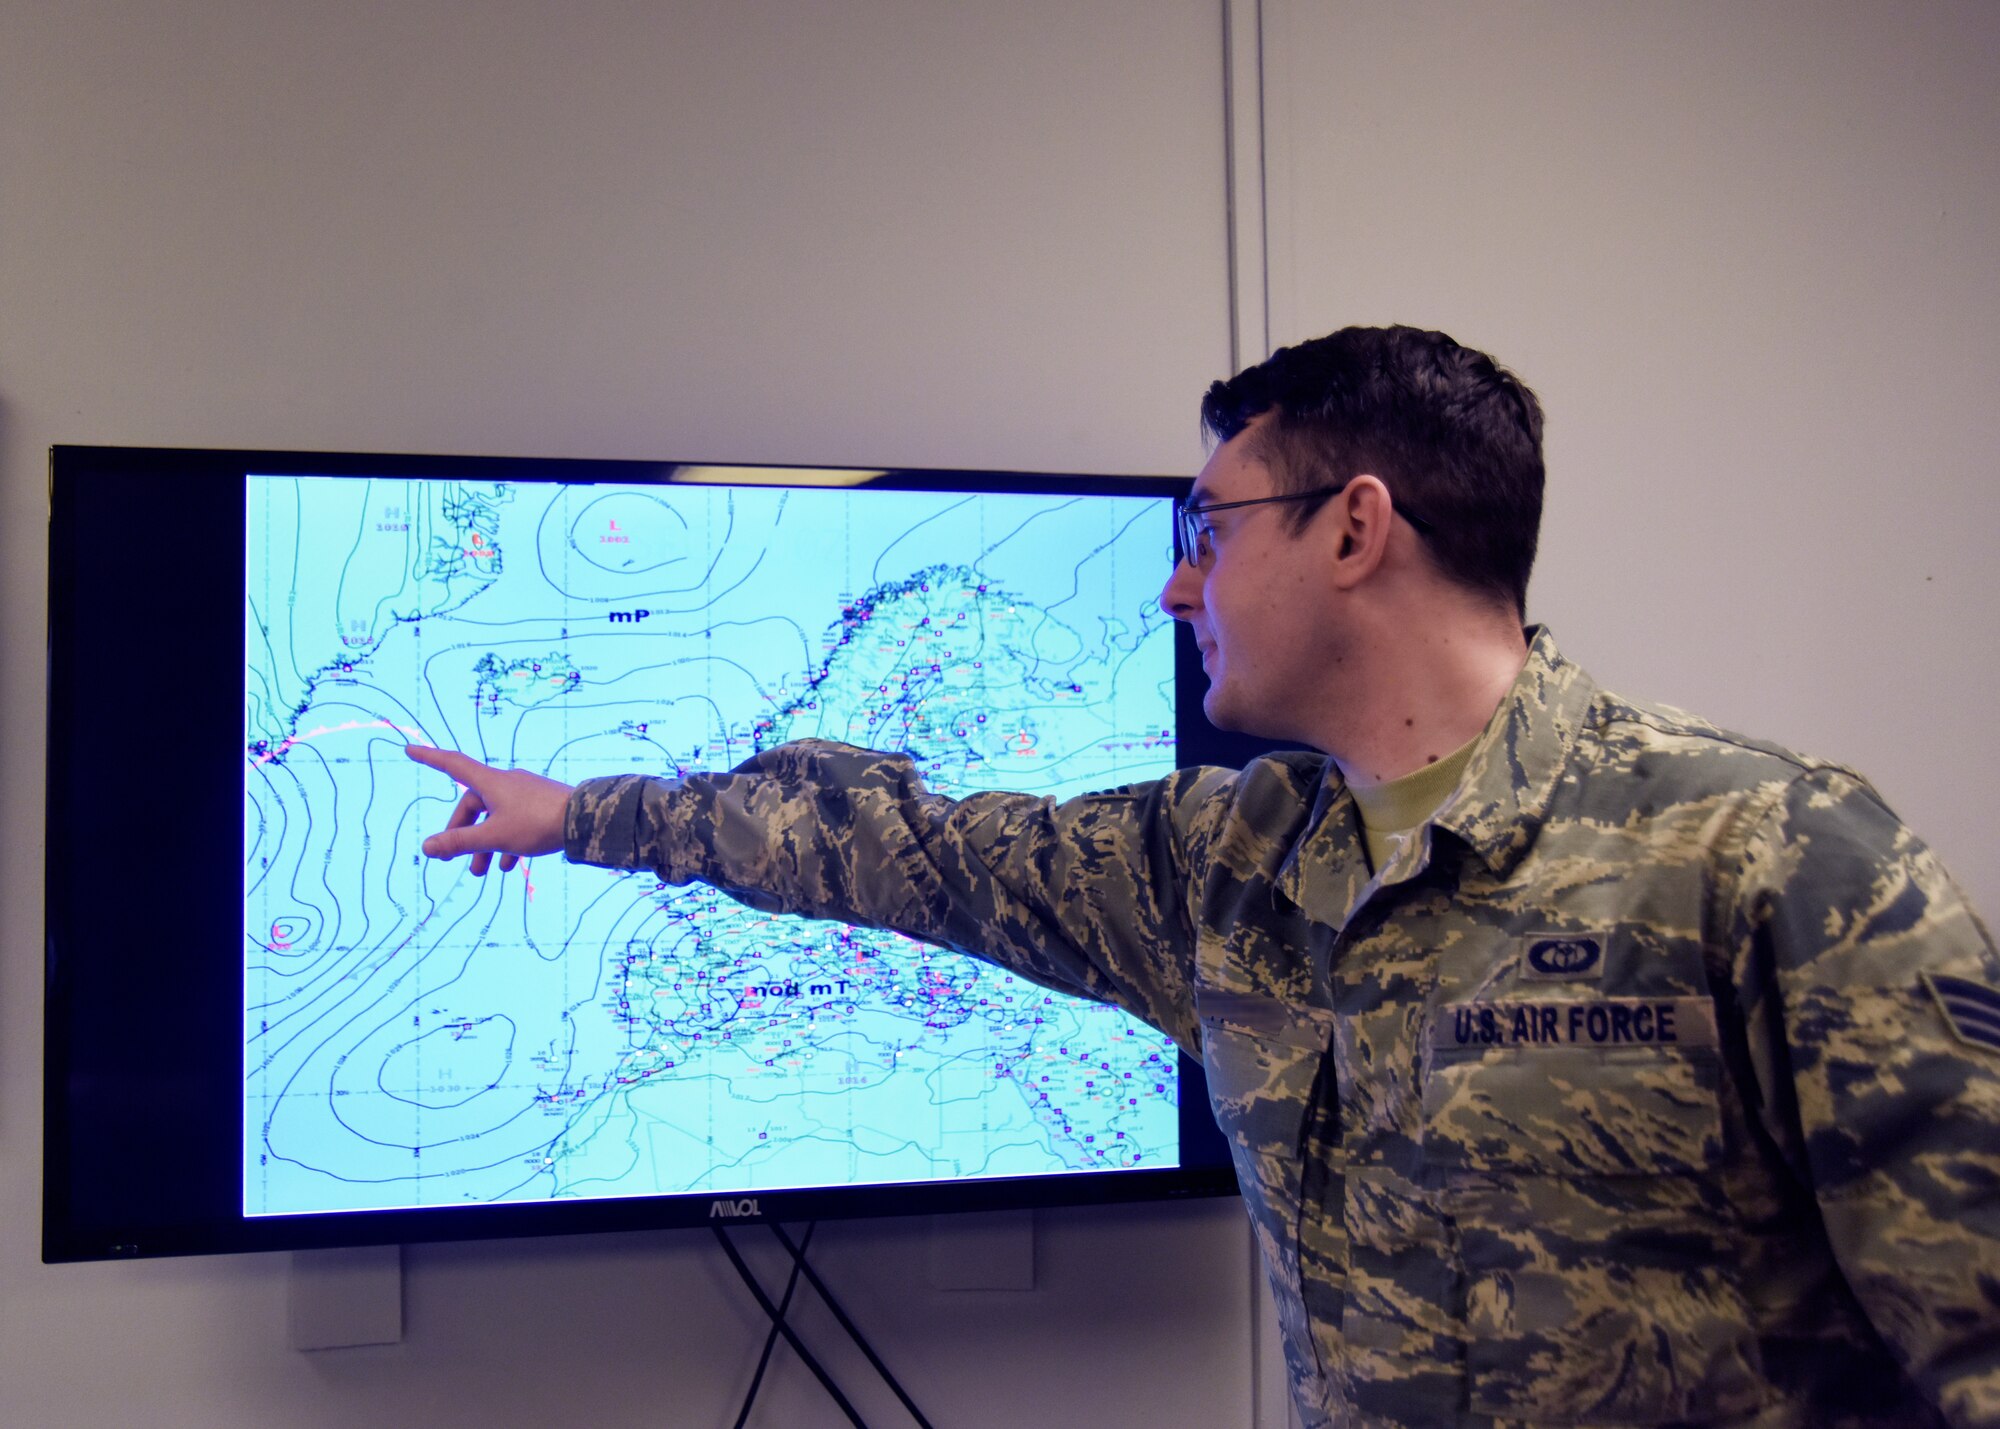 A 48th Operations Support Squadron weather forecaster journeyman displays a surface analysis map during the office morning weather briefing at Royal Air Force Lakenheath, England, March 20. Forecasters support aircrews by keeping them apprised of weather conditions, which allows them to focus on the Liberty Wing’s mission to provide responsive combat airpower and support. (U.S. Air Force photo/Senior Airman Abby L. Finkel)